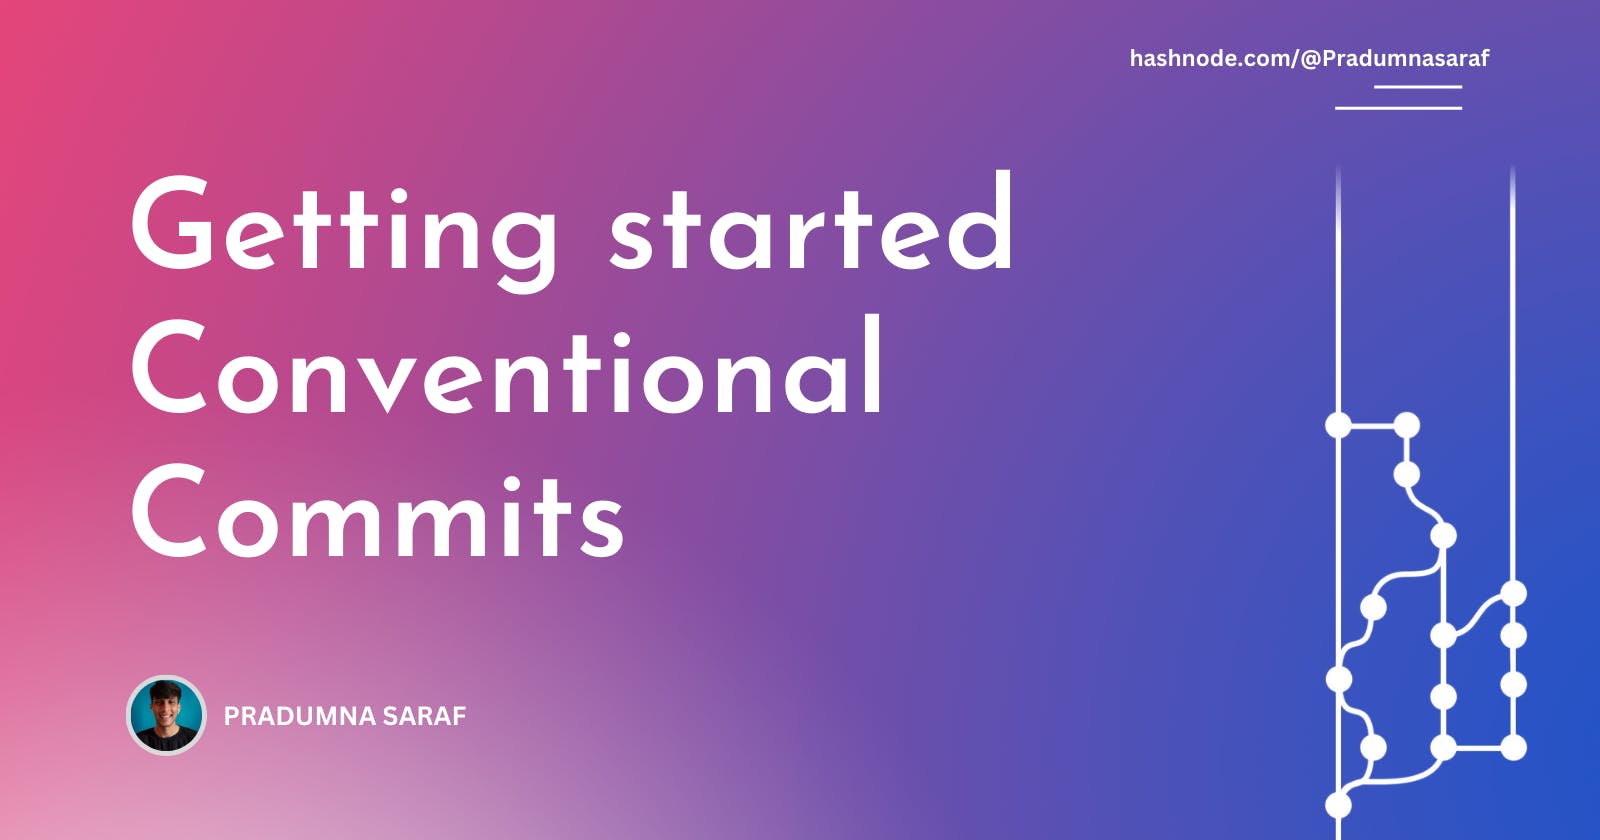 Getting started with Conventional Commits